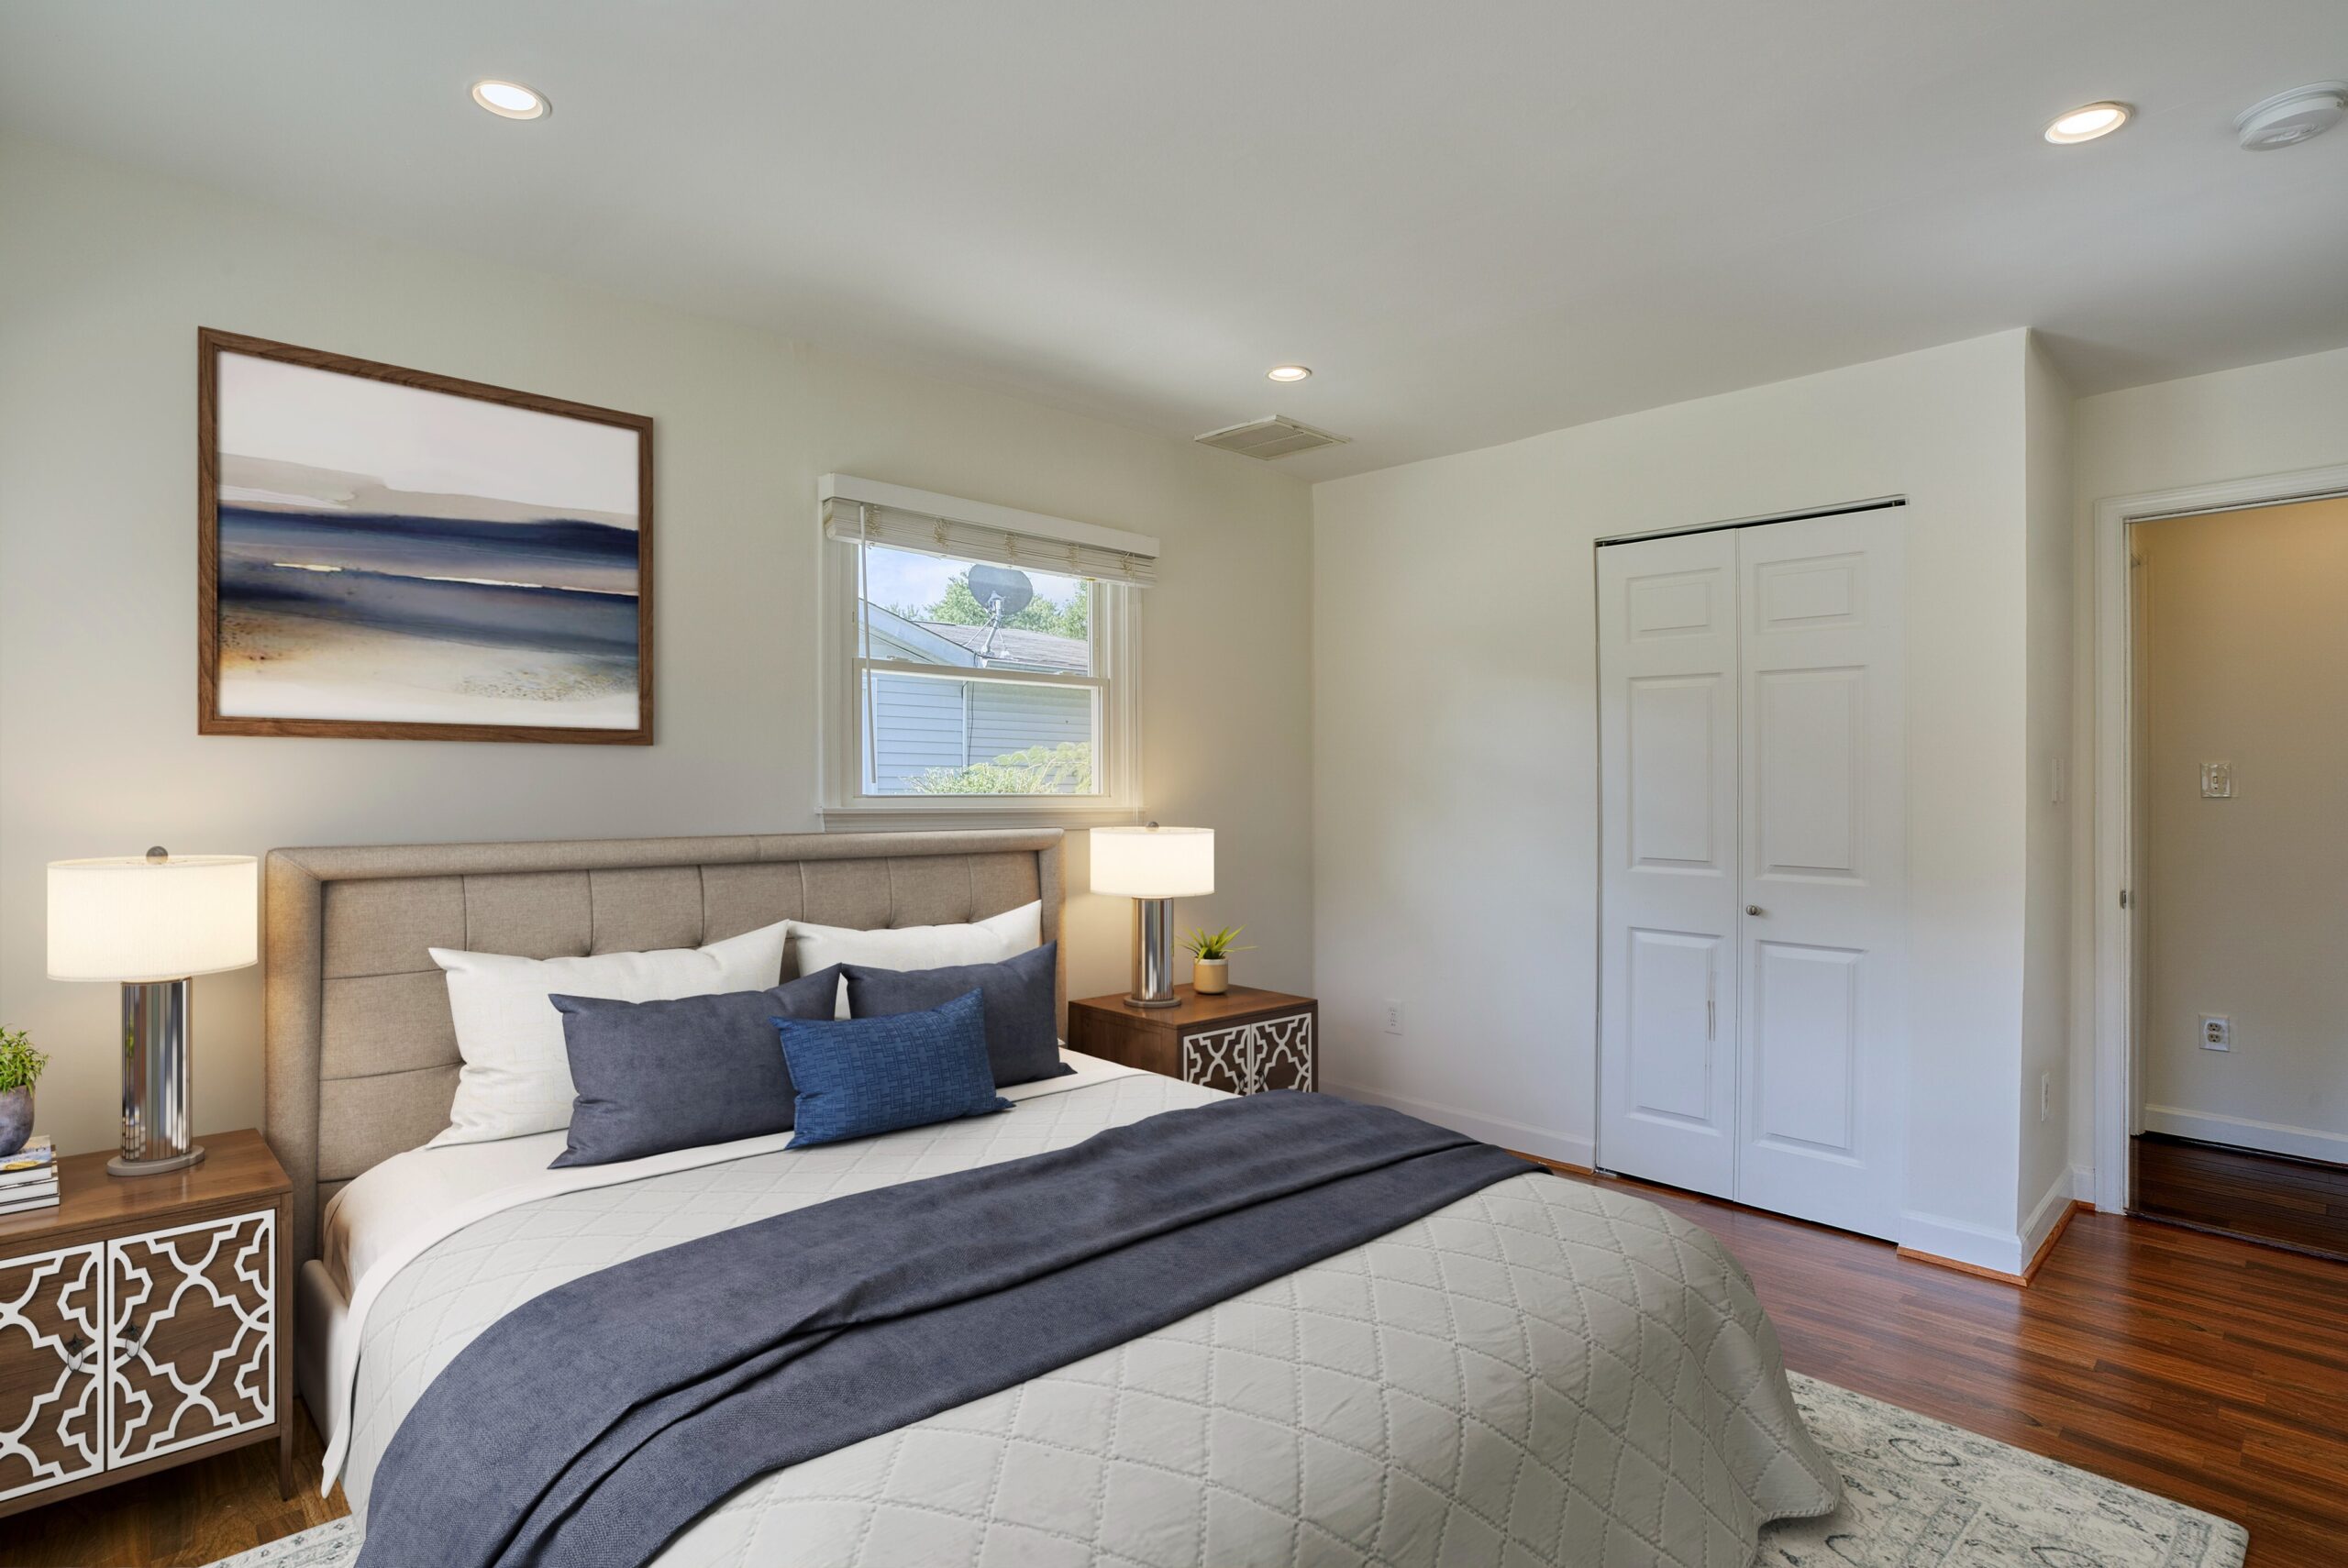 Professional interior photo of 1103 S Greenthorn Ave in Sterling, VA - showing a bedroom with hardwood floors and double door closet which has been virtually staged as a bedroom 